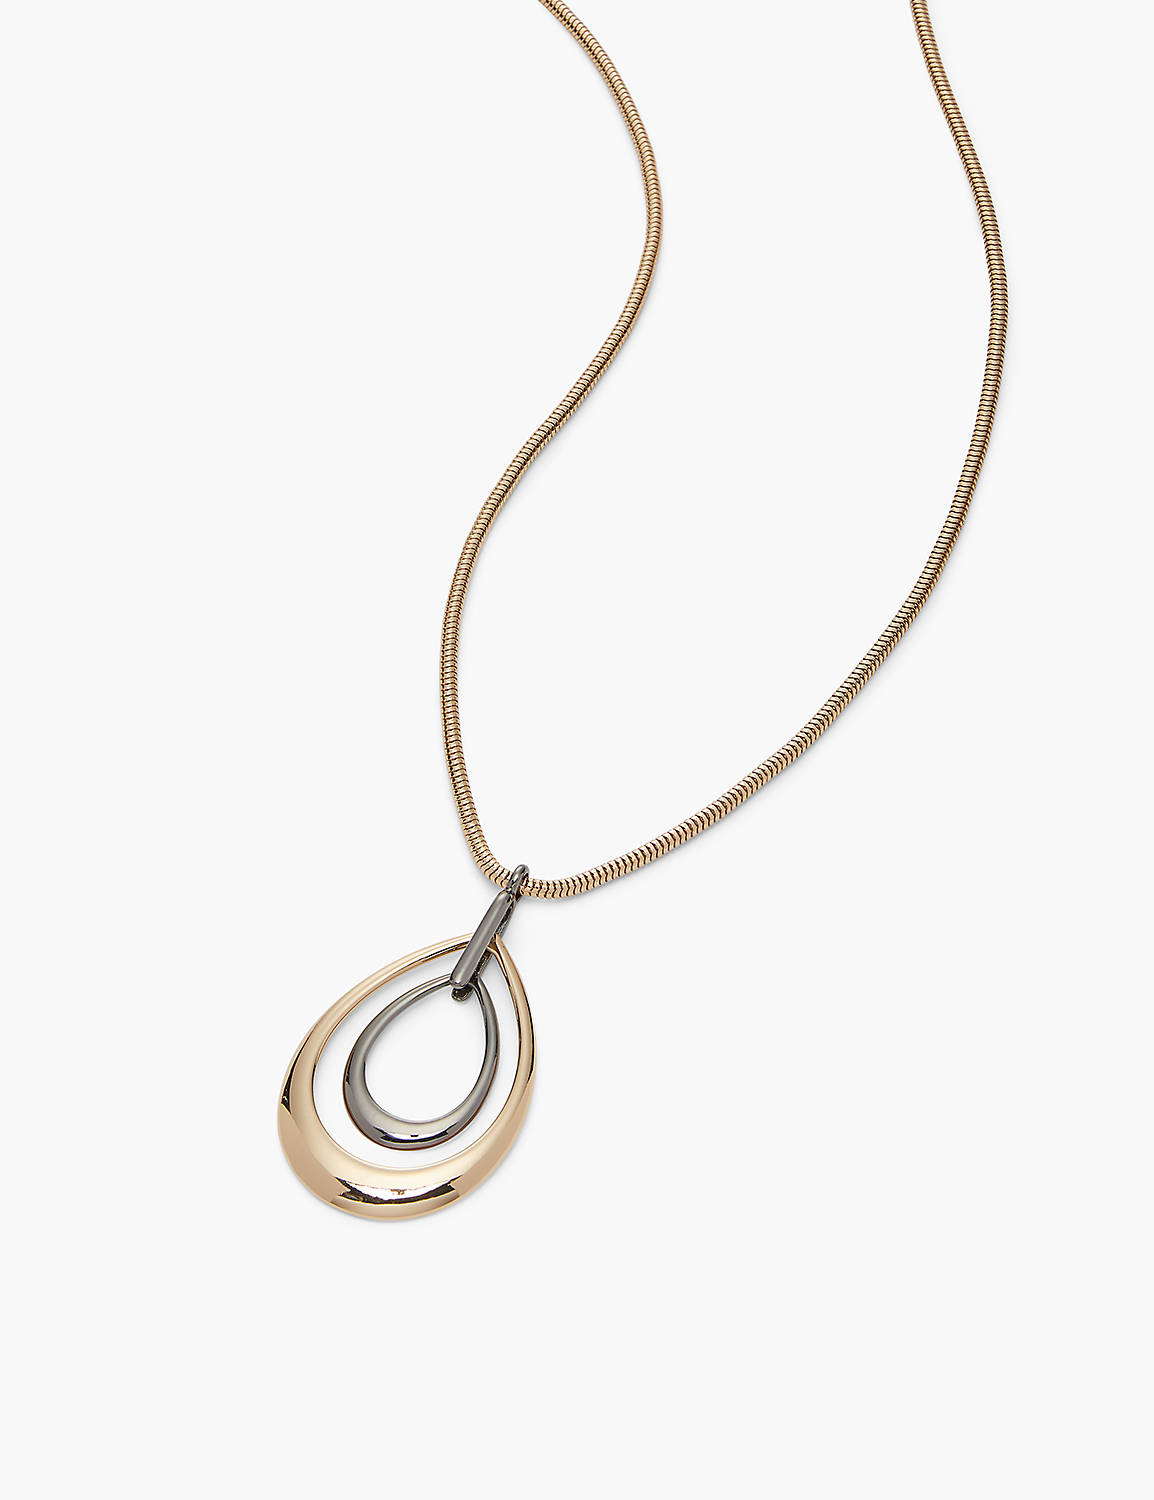 Mixed-Metal Teardrop Pendant Necklace Product Image 1